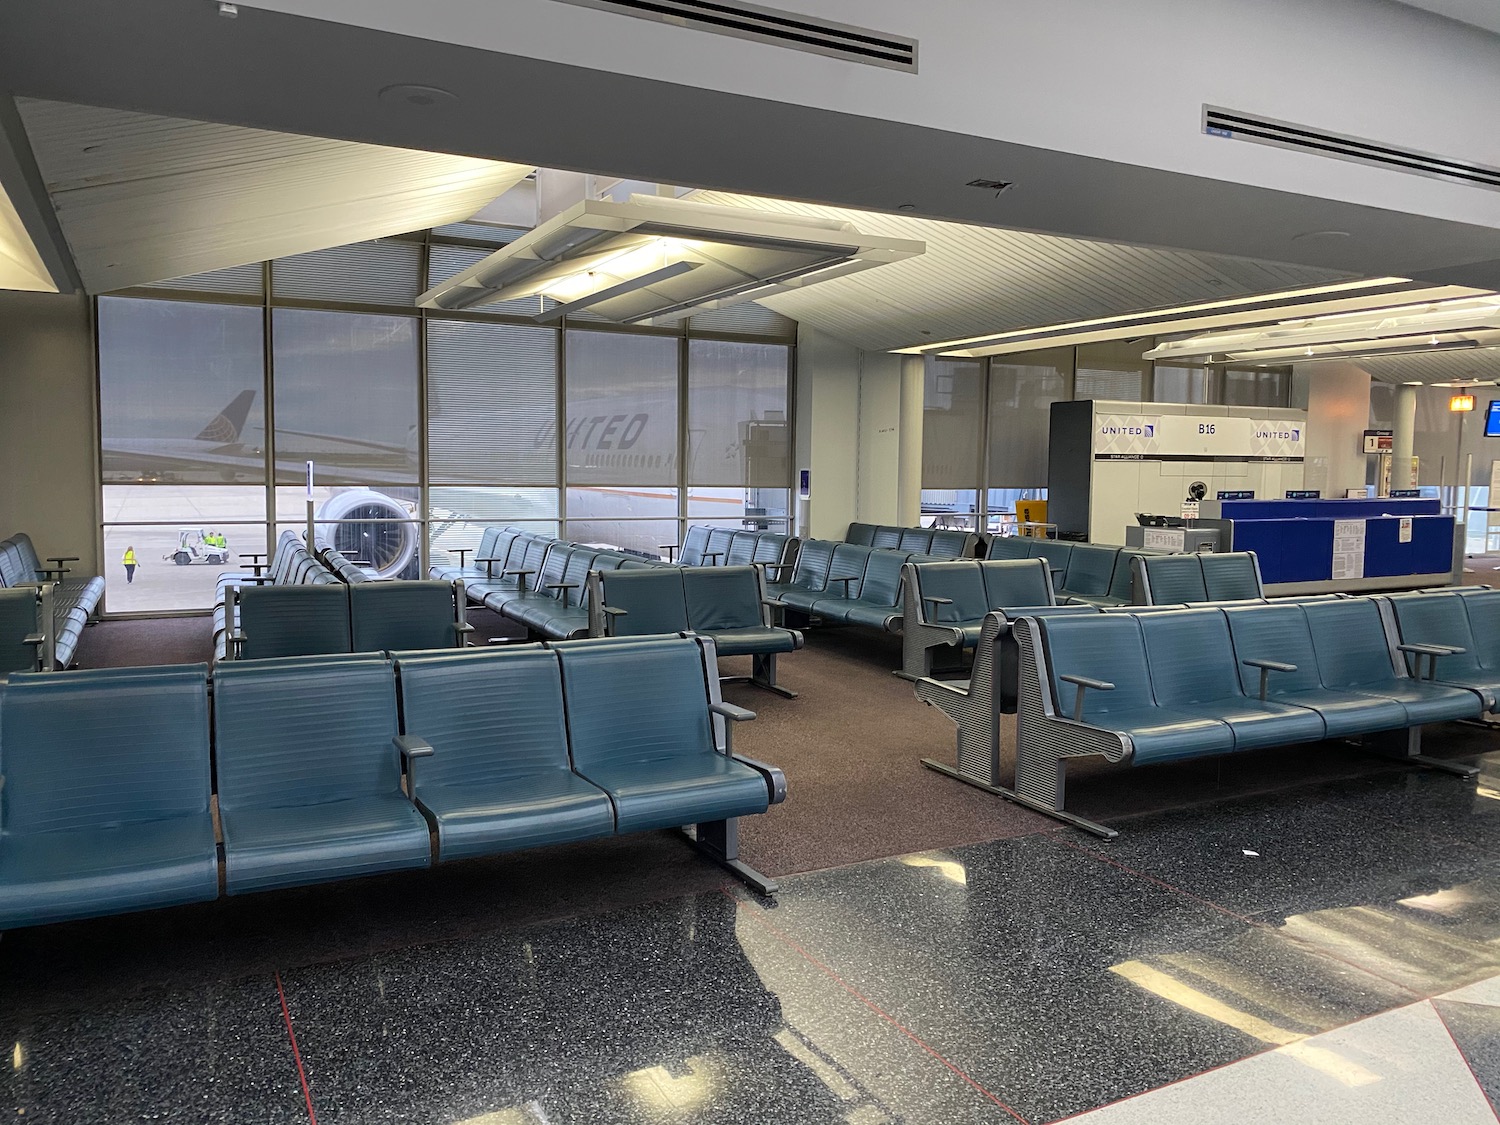 a row of blue chairs in an airport terminal